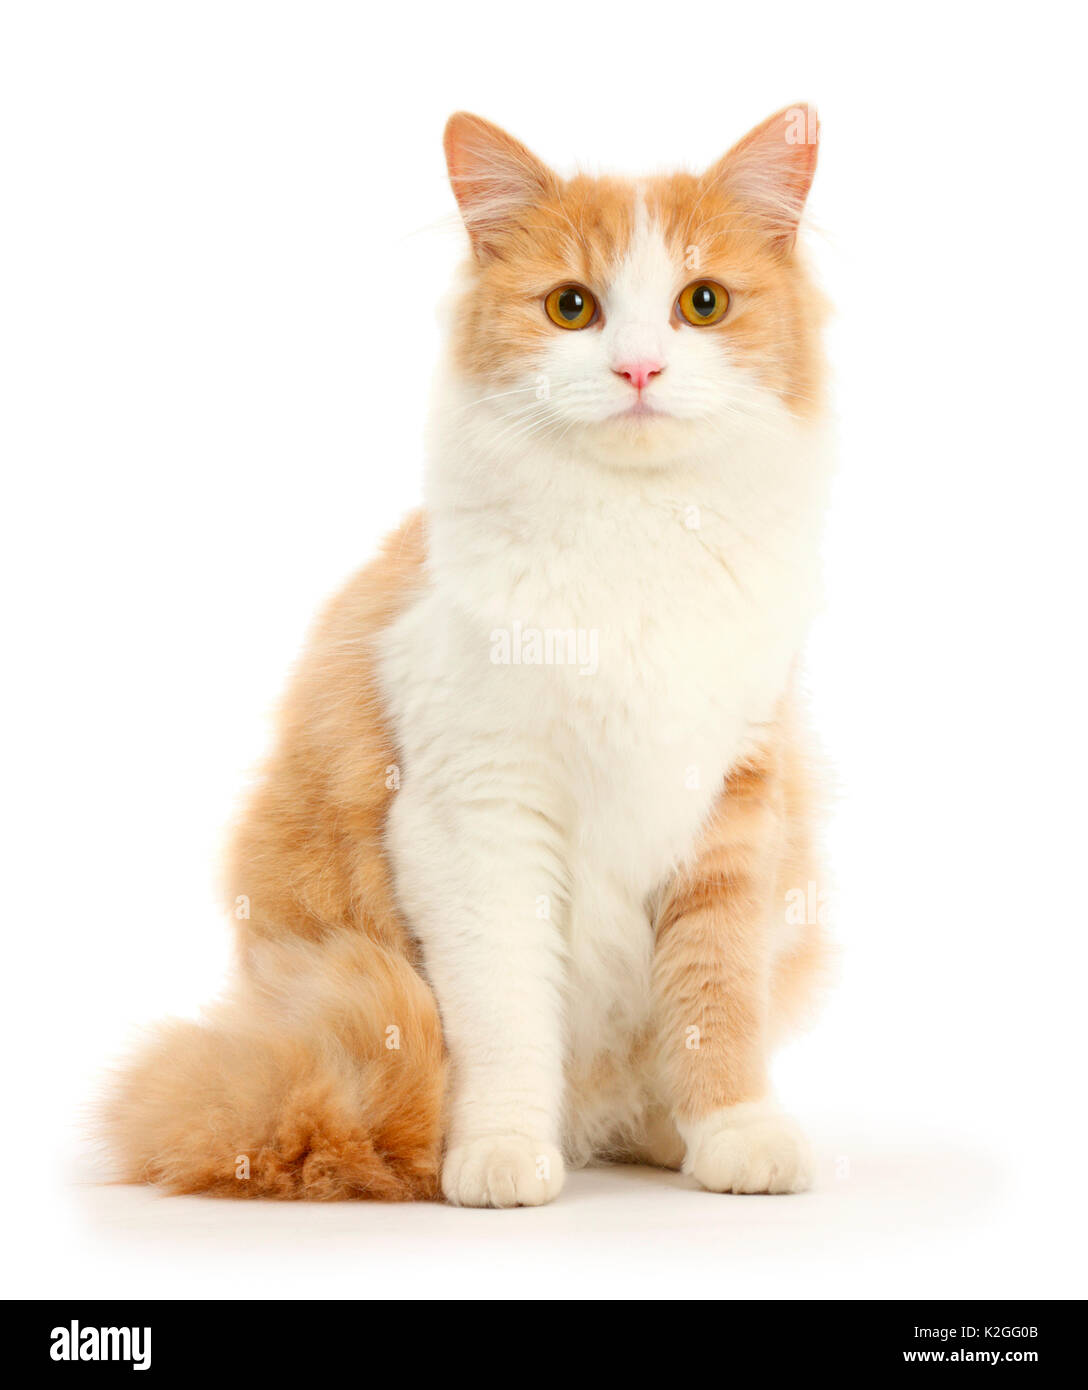 Ginger-And-White Siberian Cat, Age 1 Year, Sitting Stock Photo - Alamy